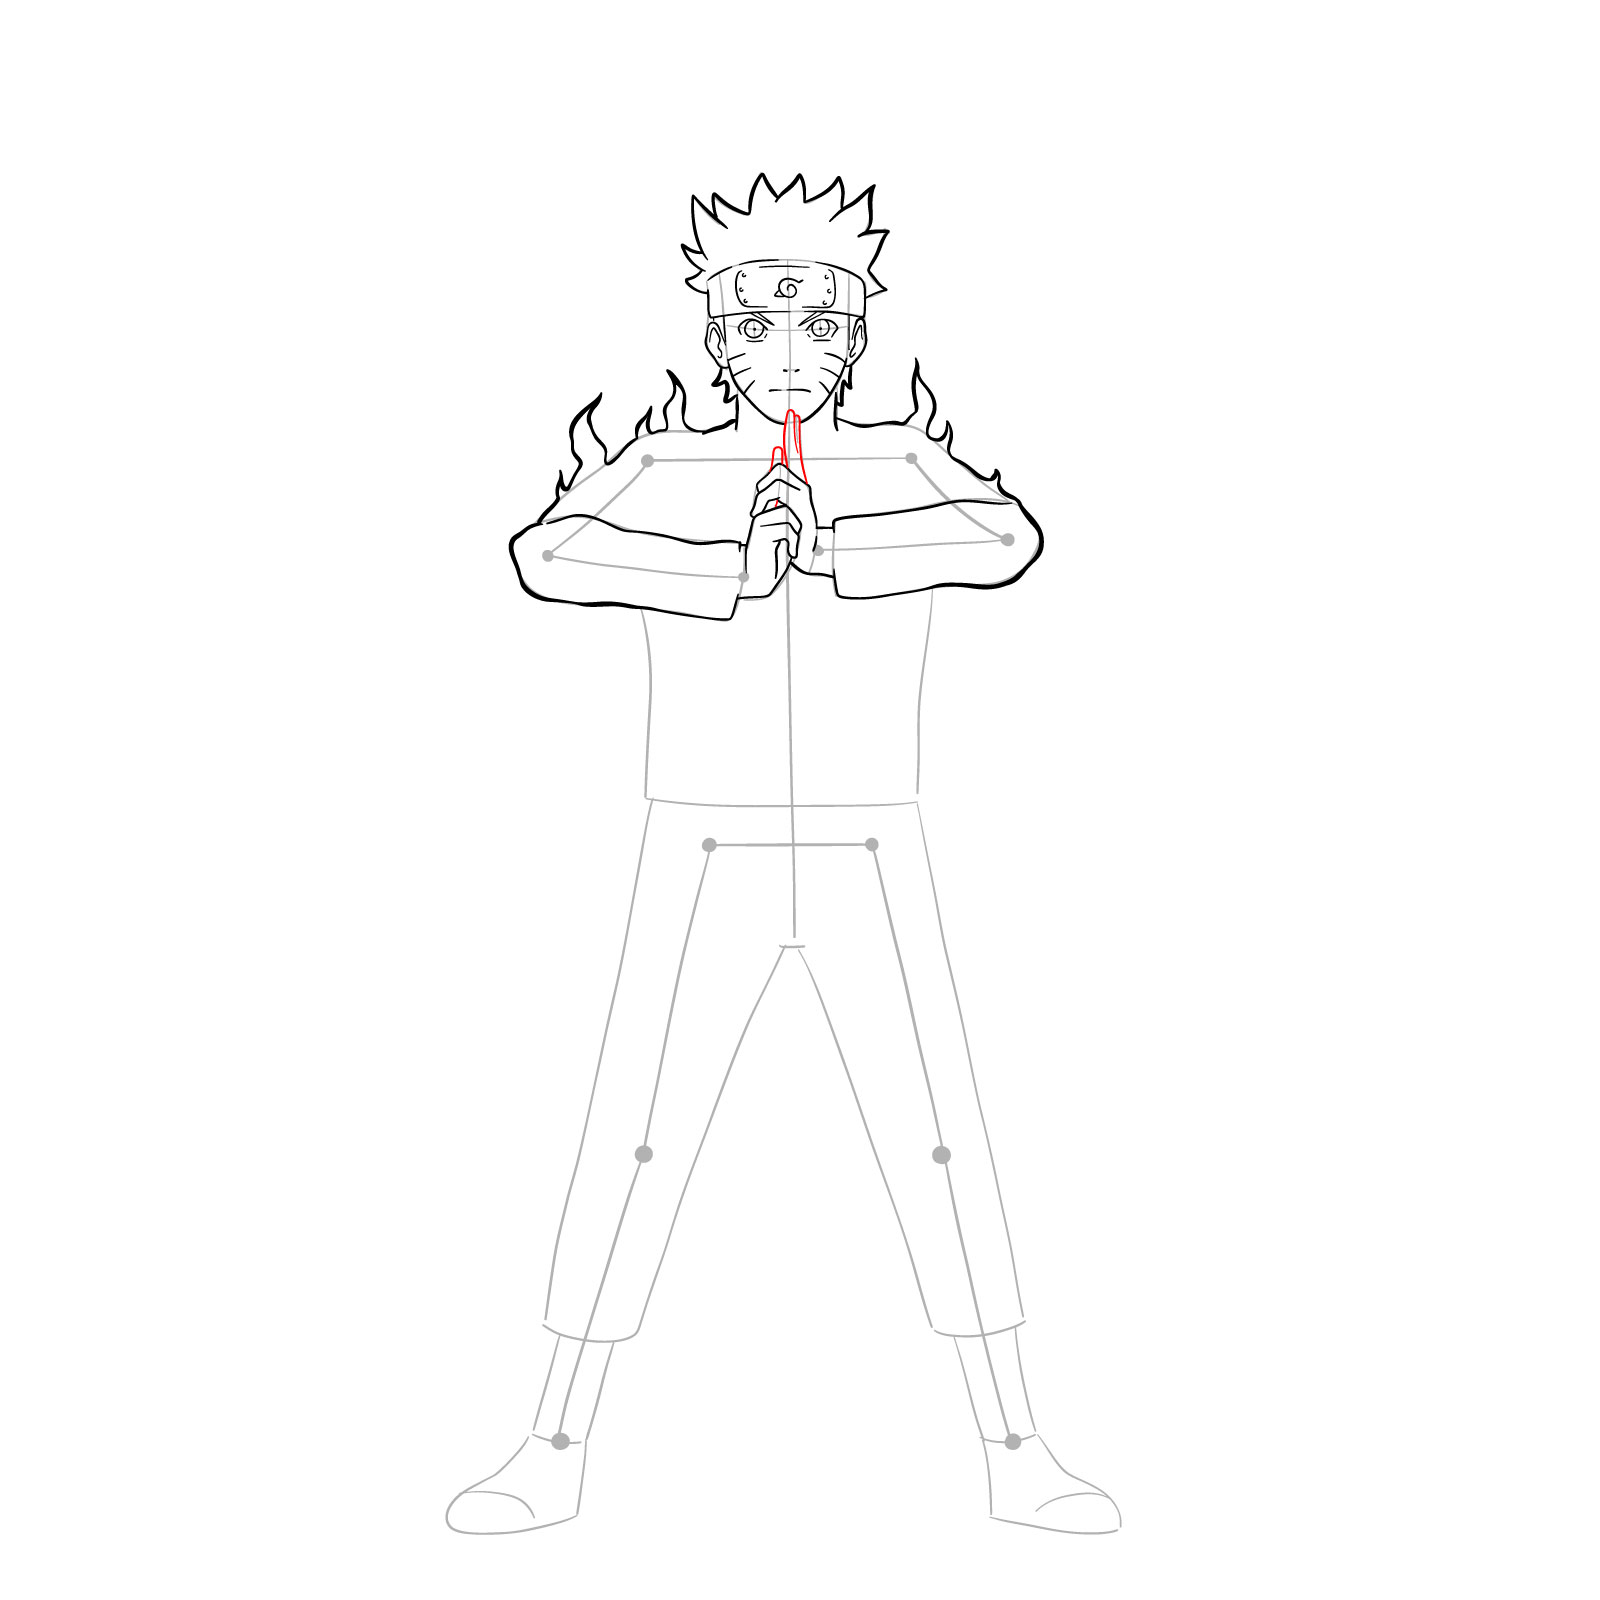 How to draw Naruto in Nine-Tails Chakra Mode - step 21